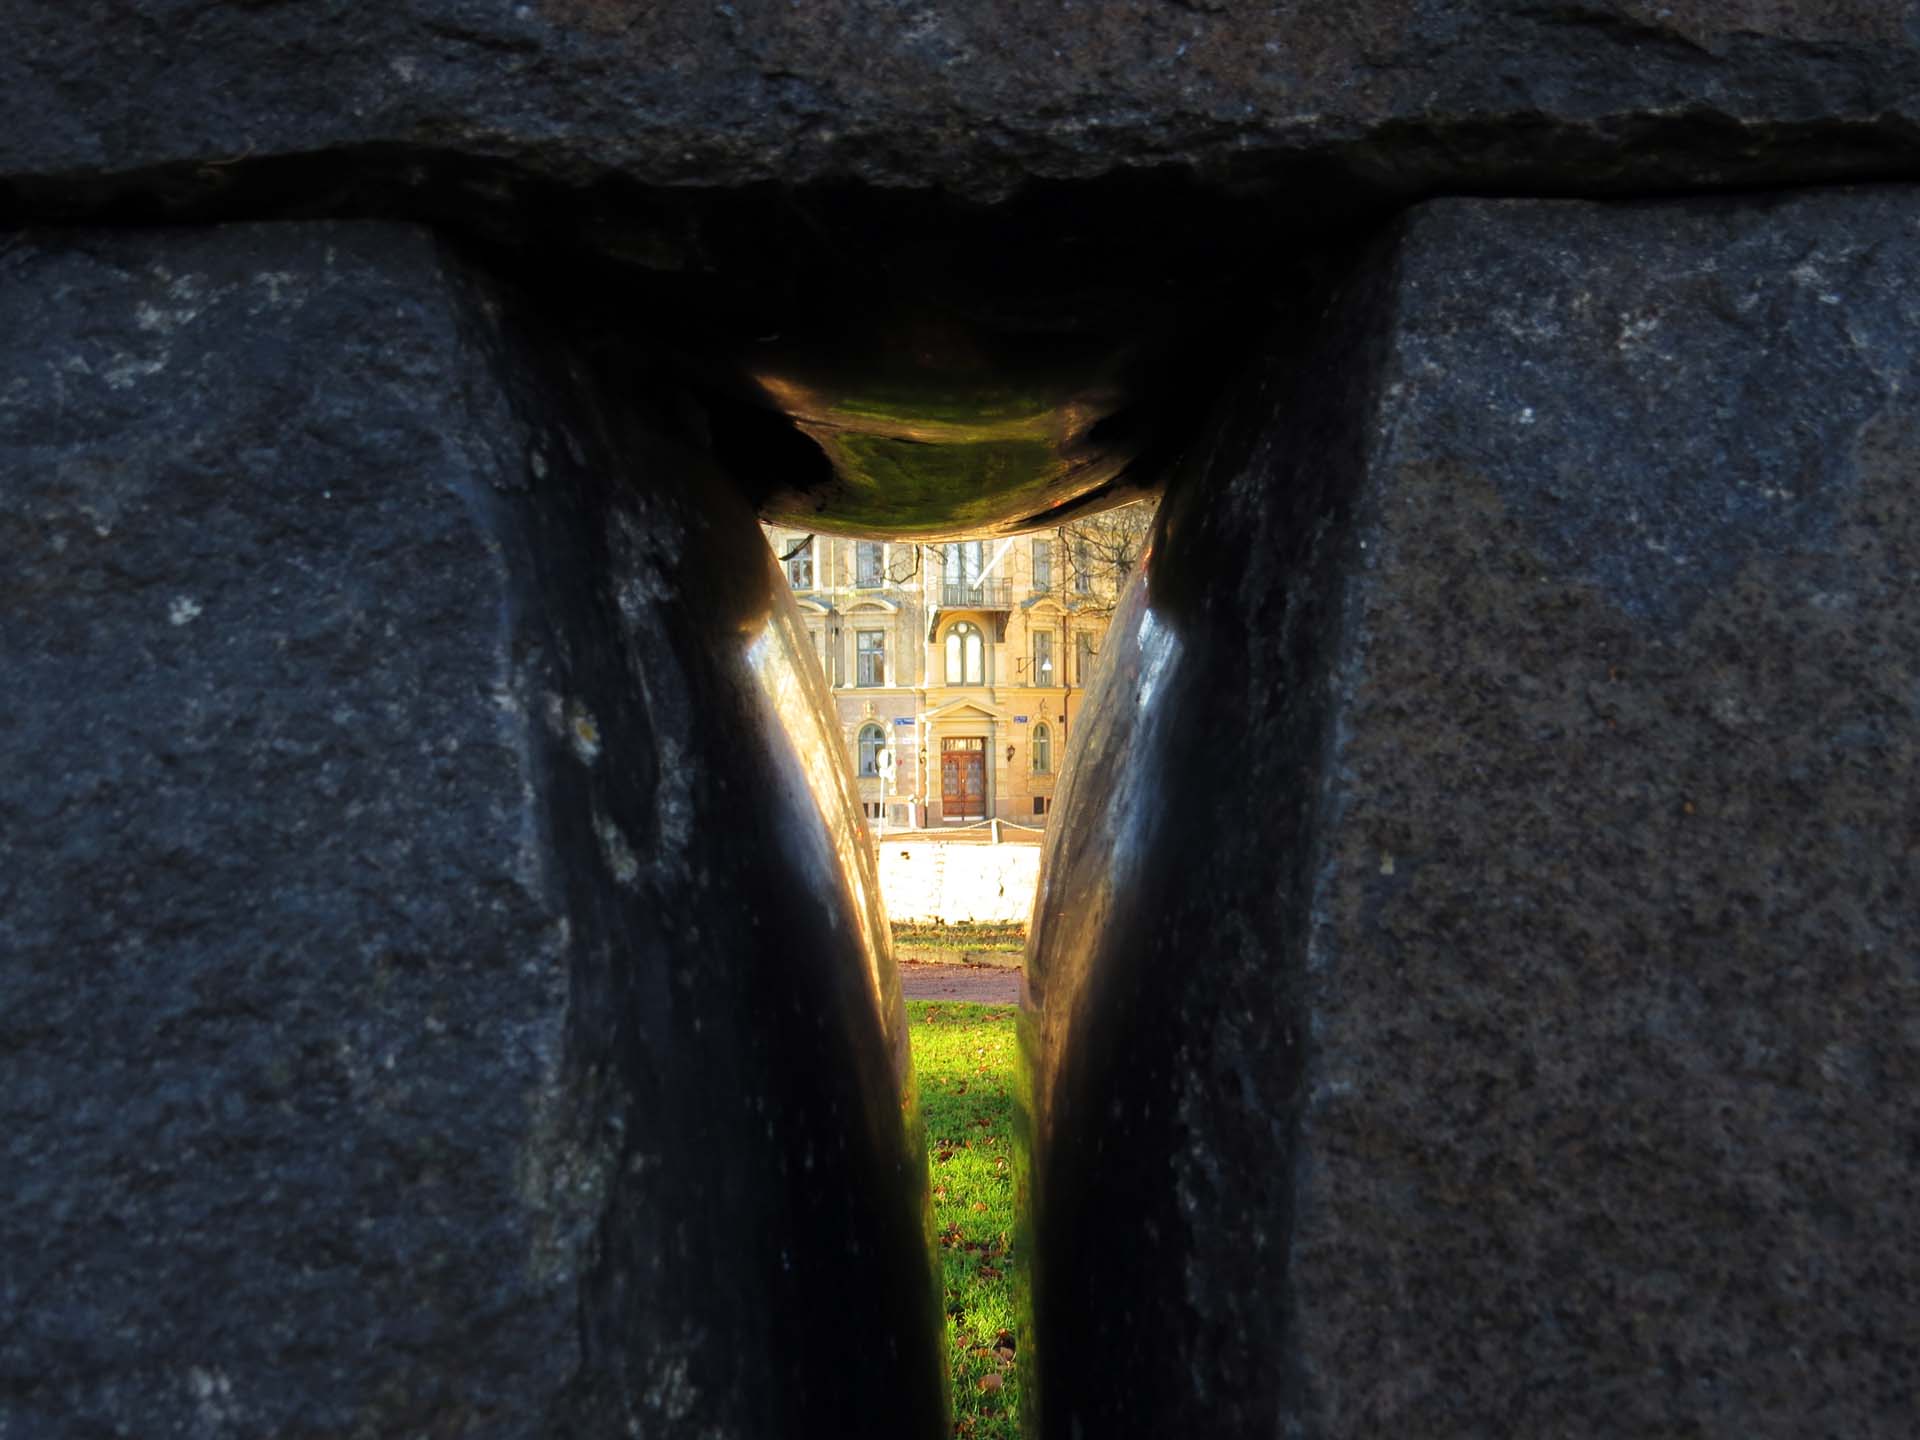 Through the polished thighs of a standing stone sculpture, the door of a building in old central Gothenburg is seen and reflected in the polished stone